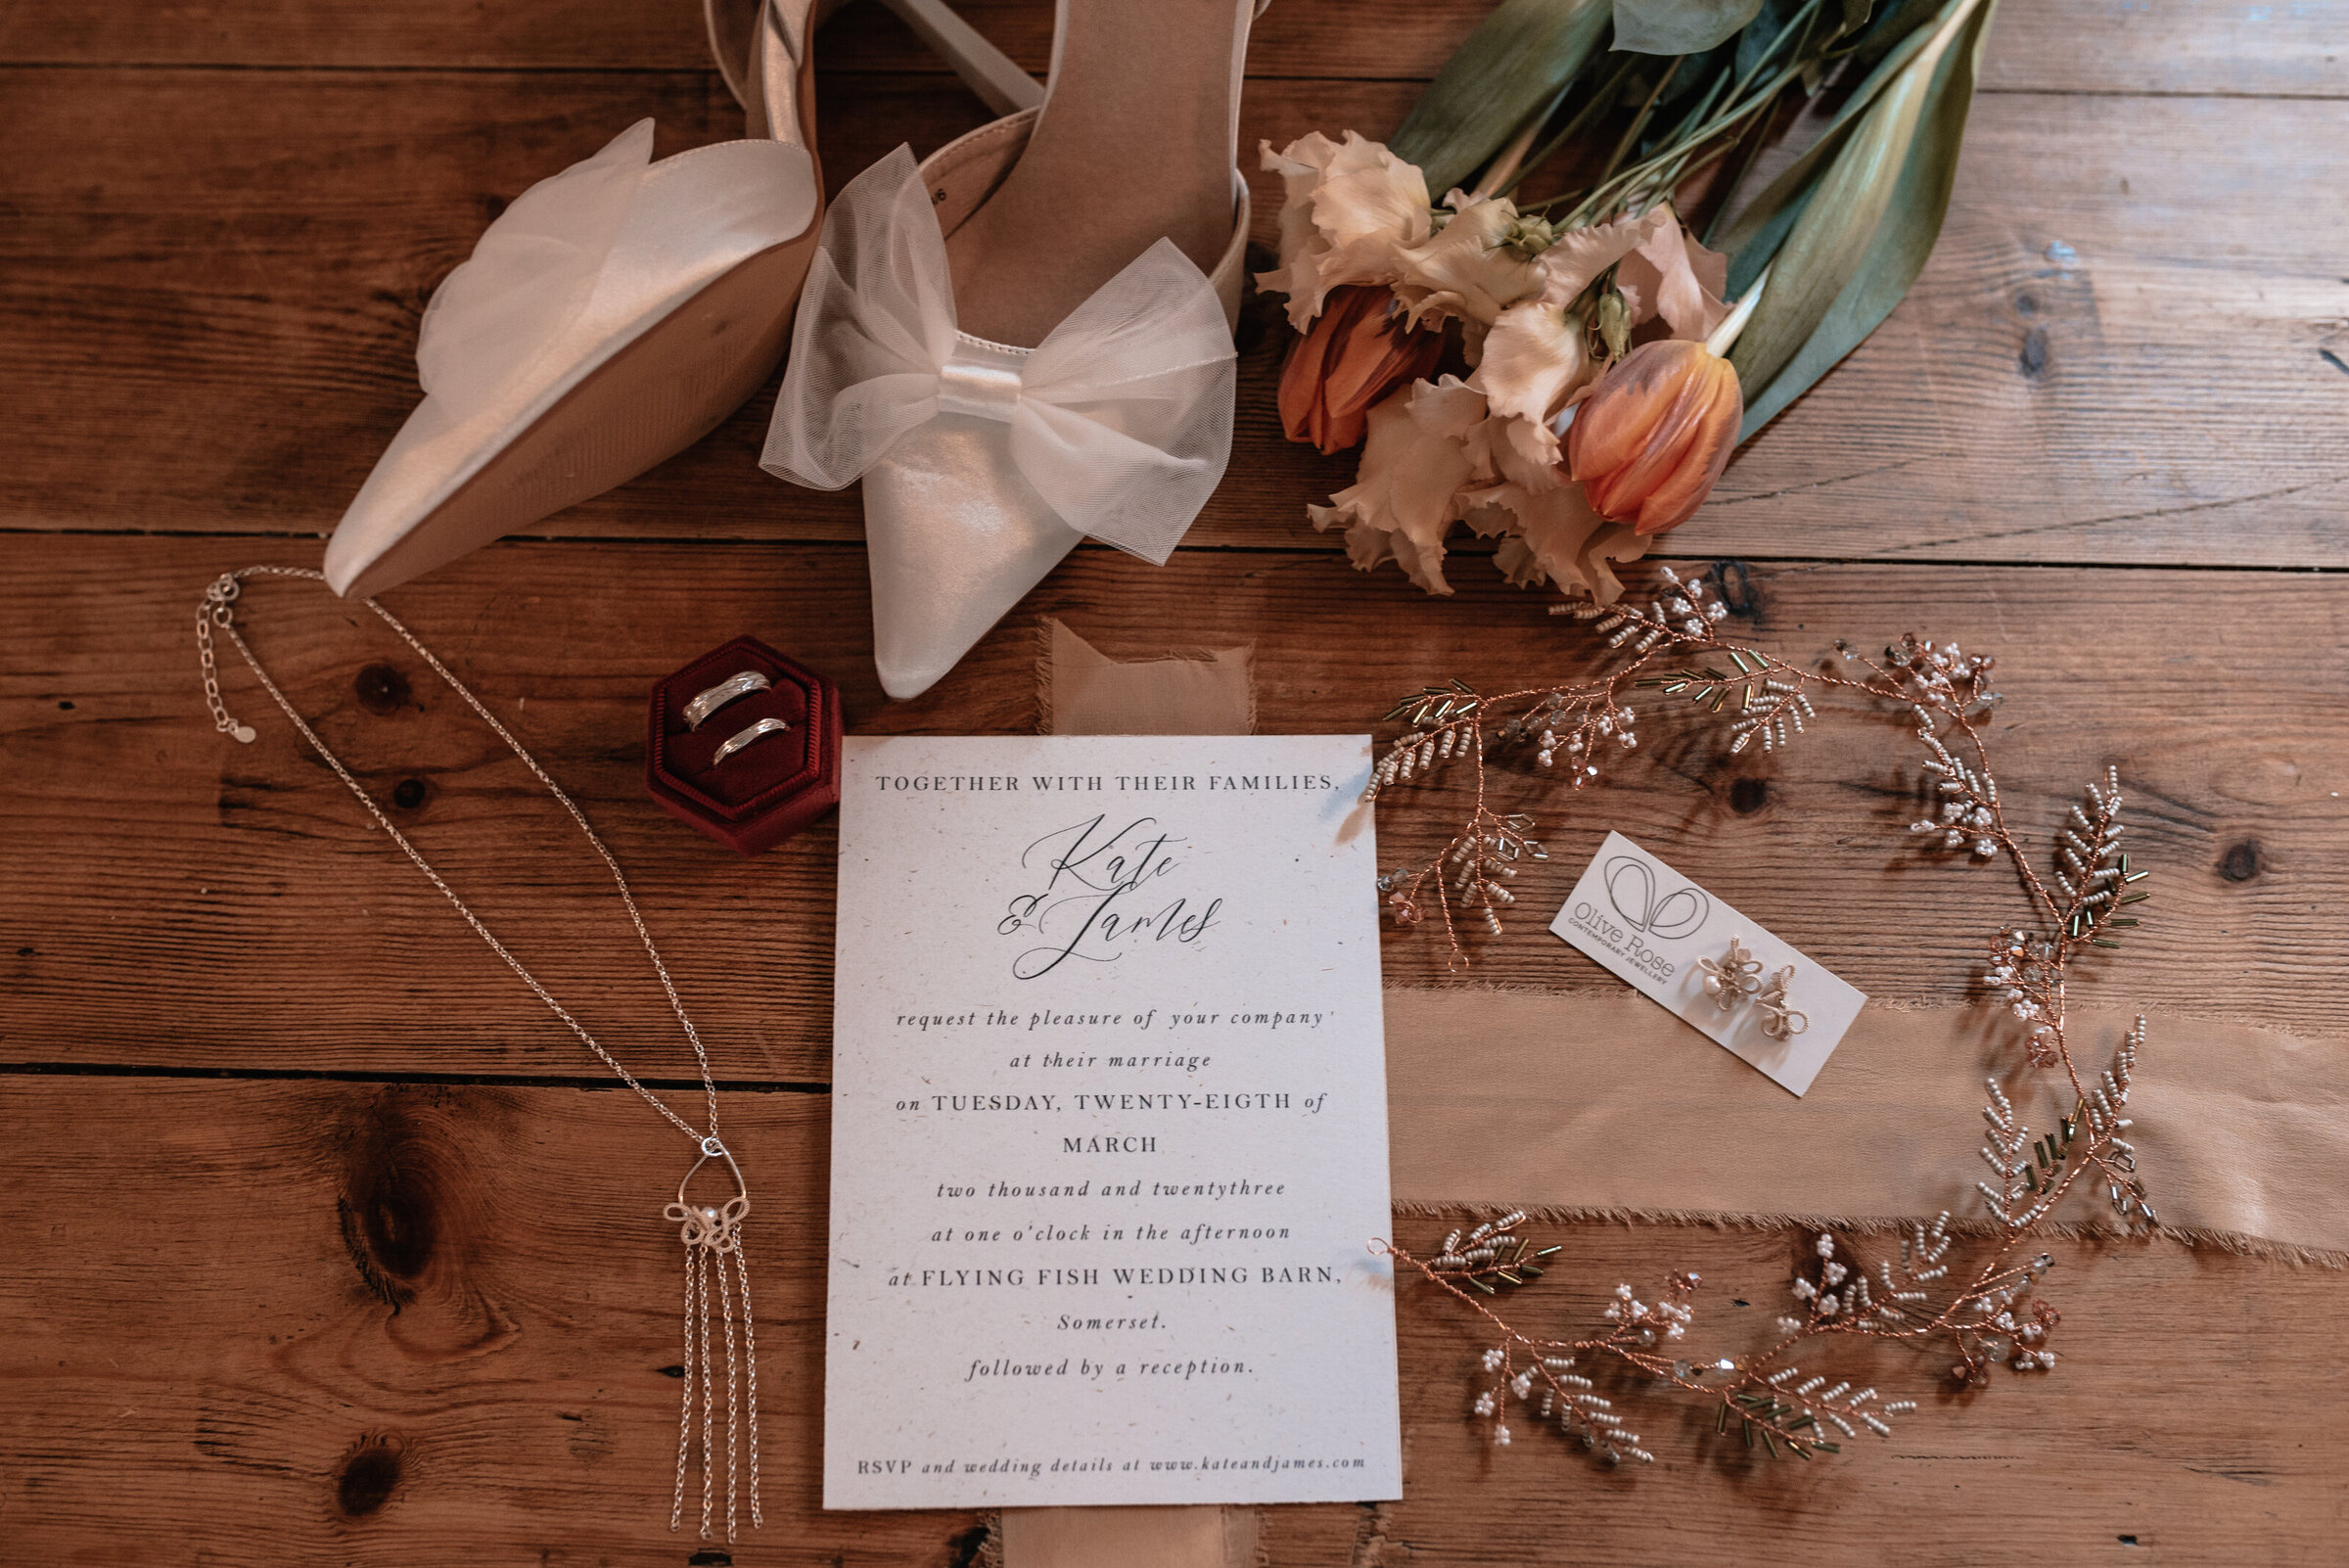 Wedding invitation surrounded by bridal jewellery, wedding rings, bridal shoes and bouquet on a wooden table